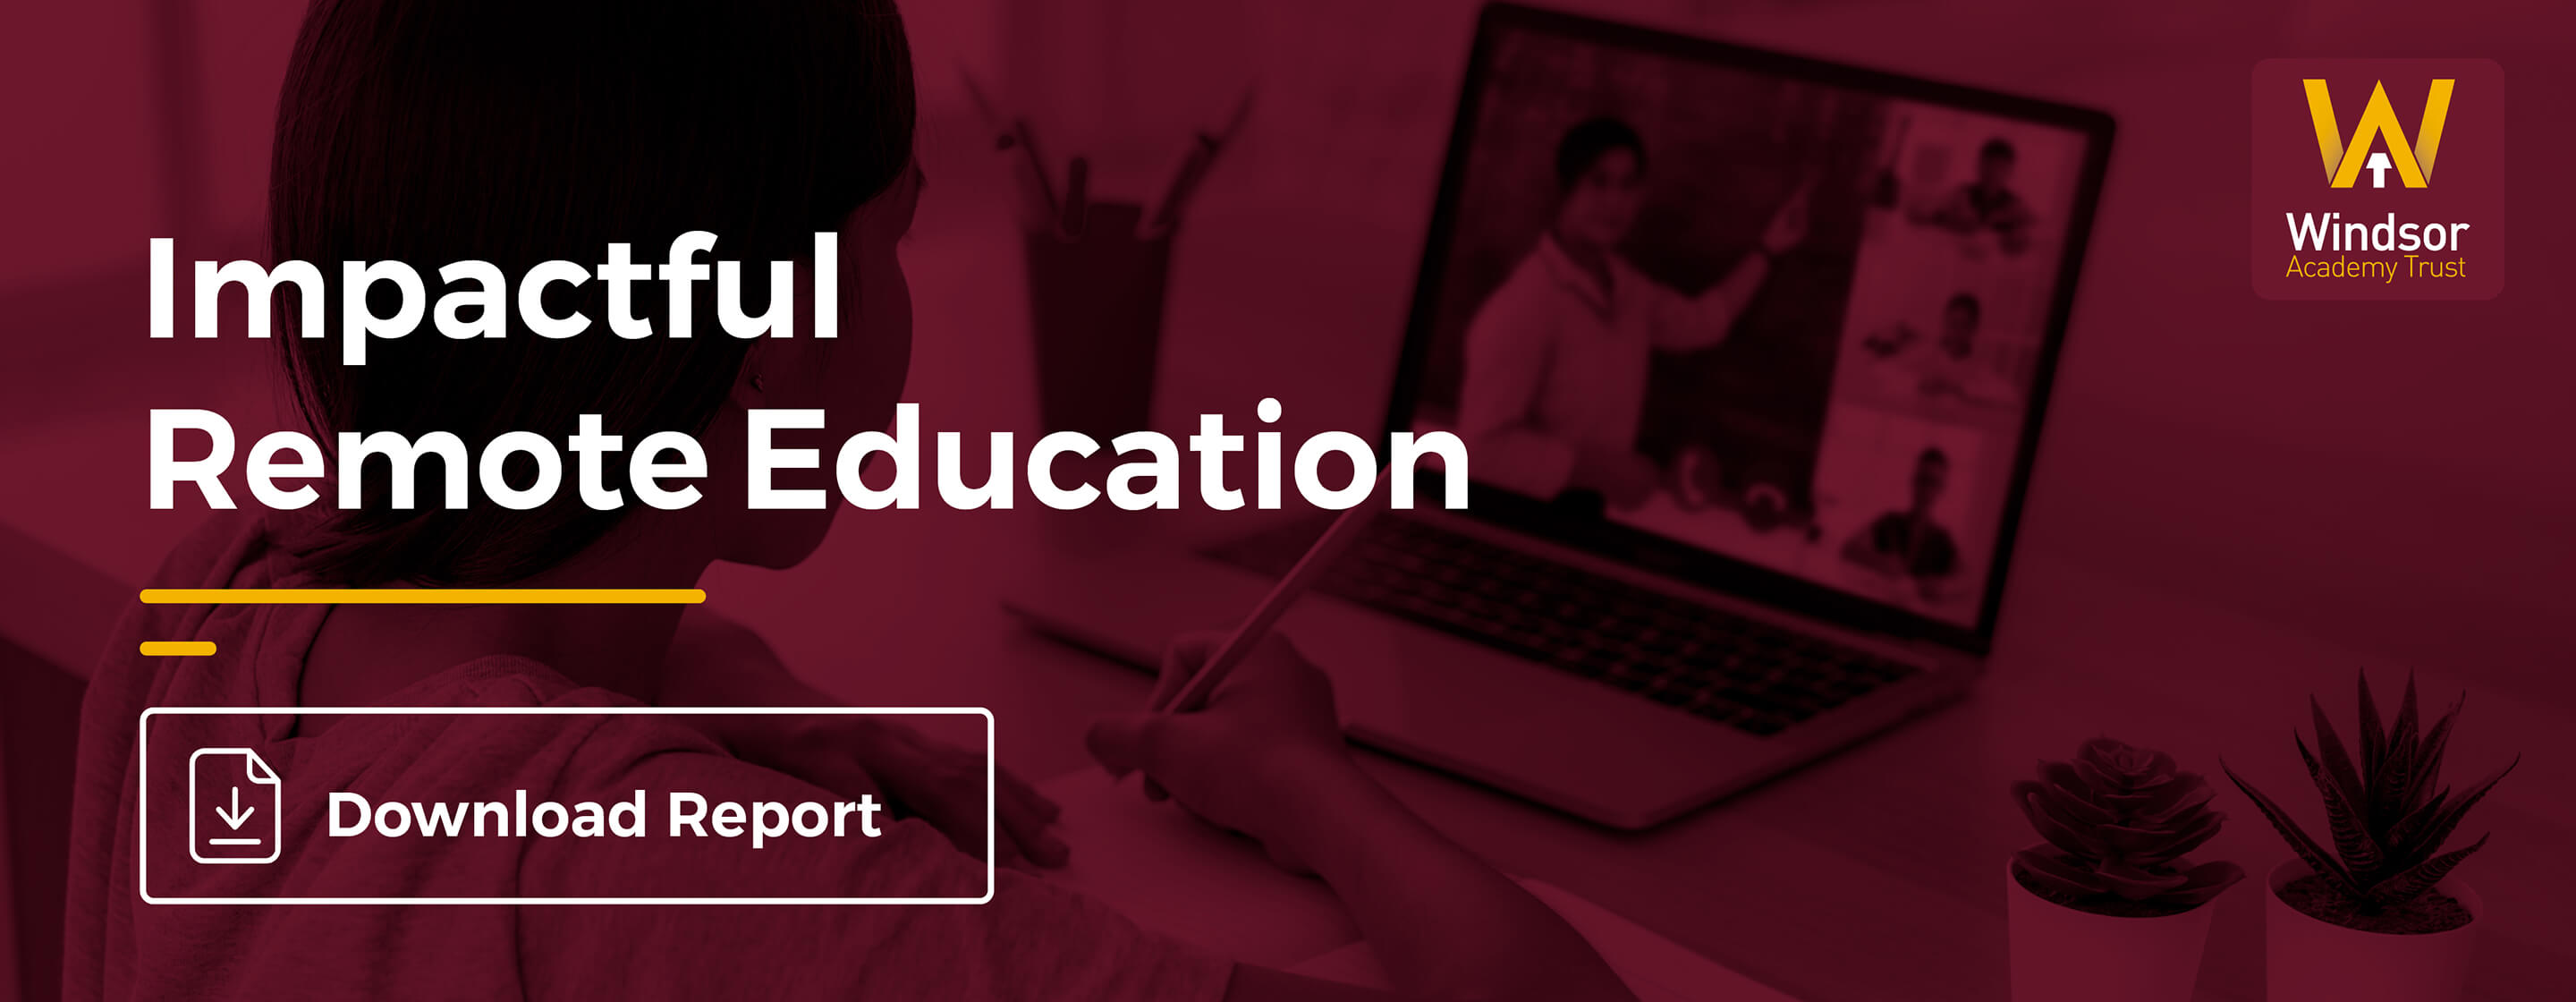 download the impactful remote education report